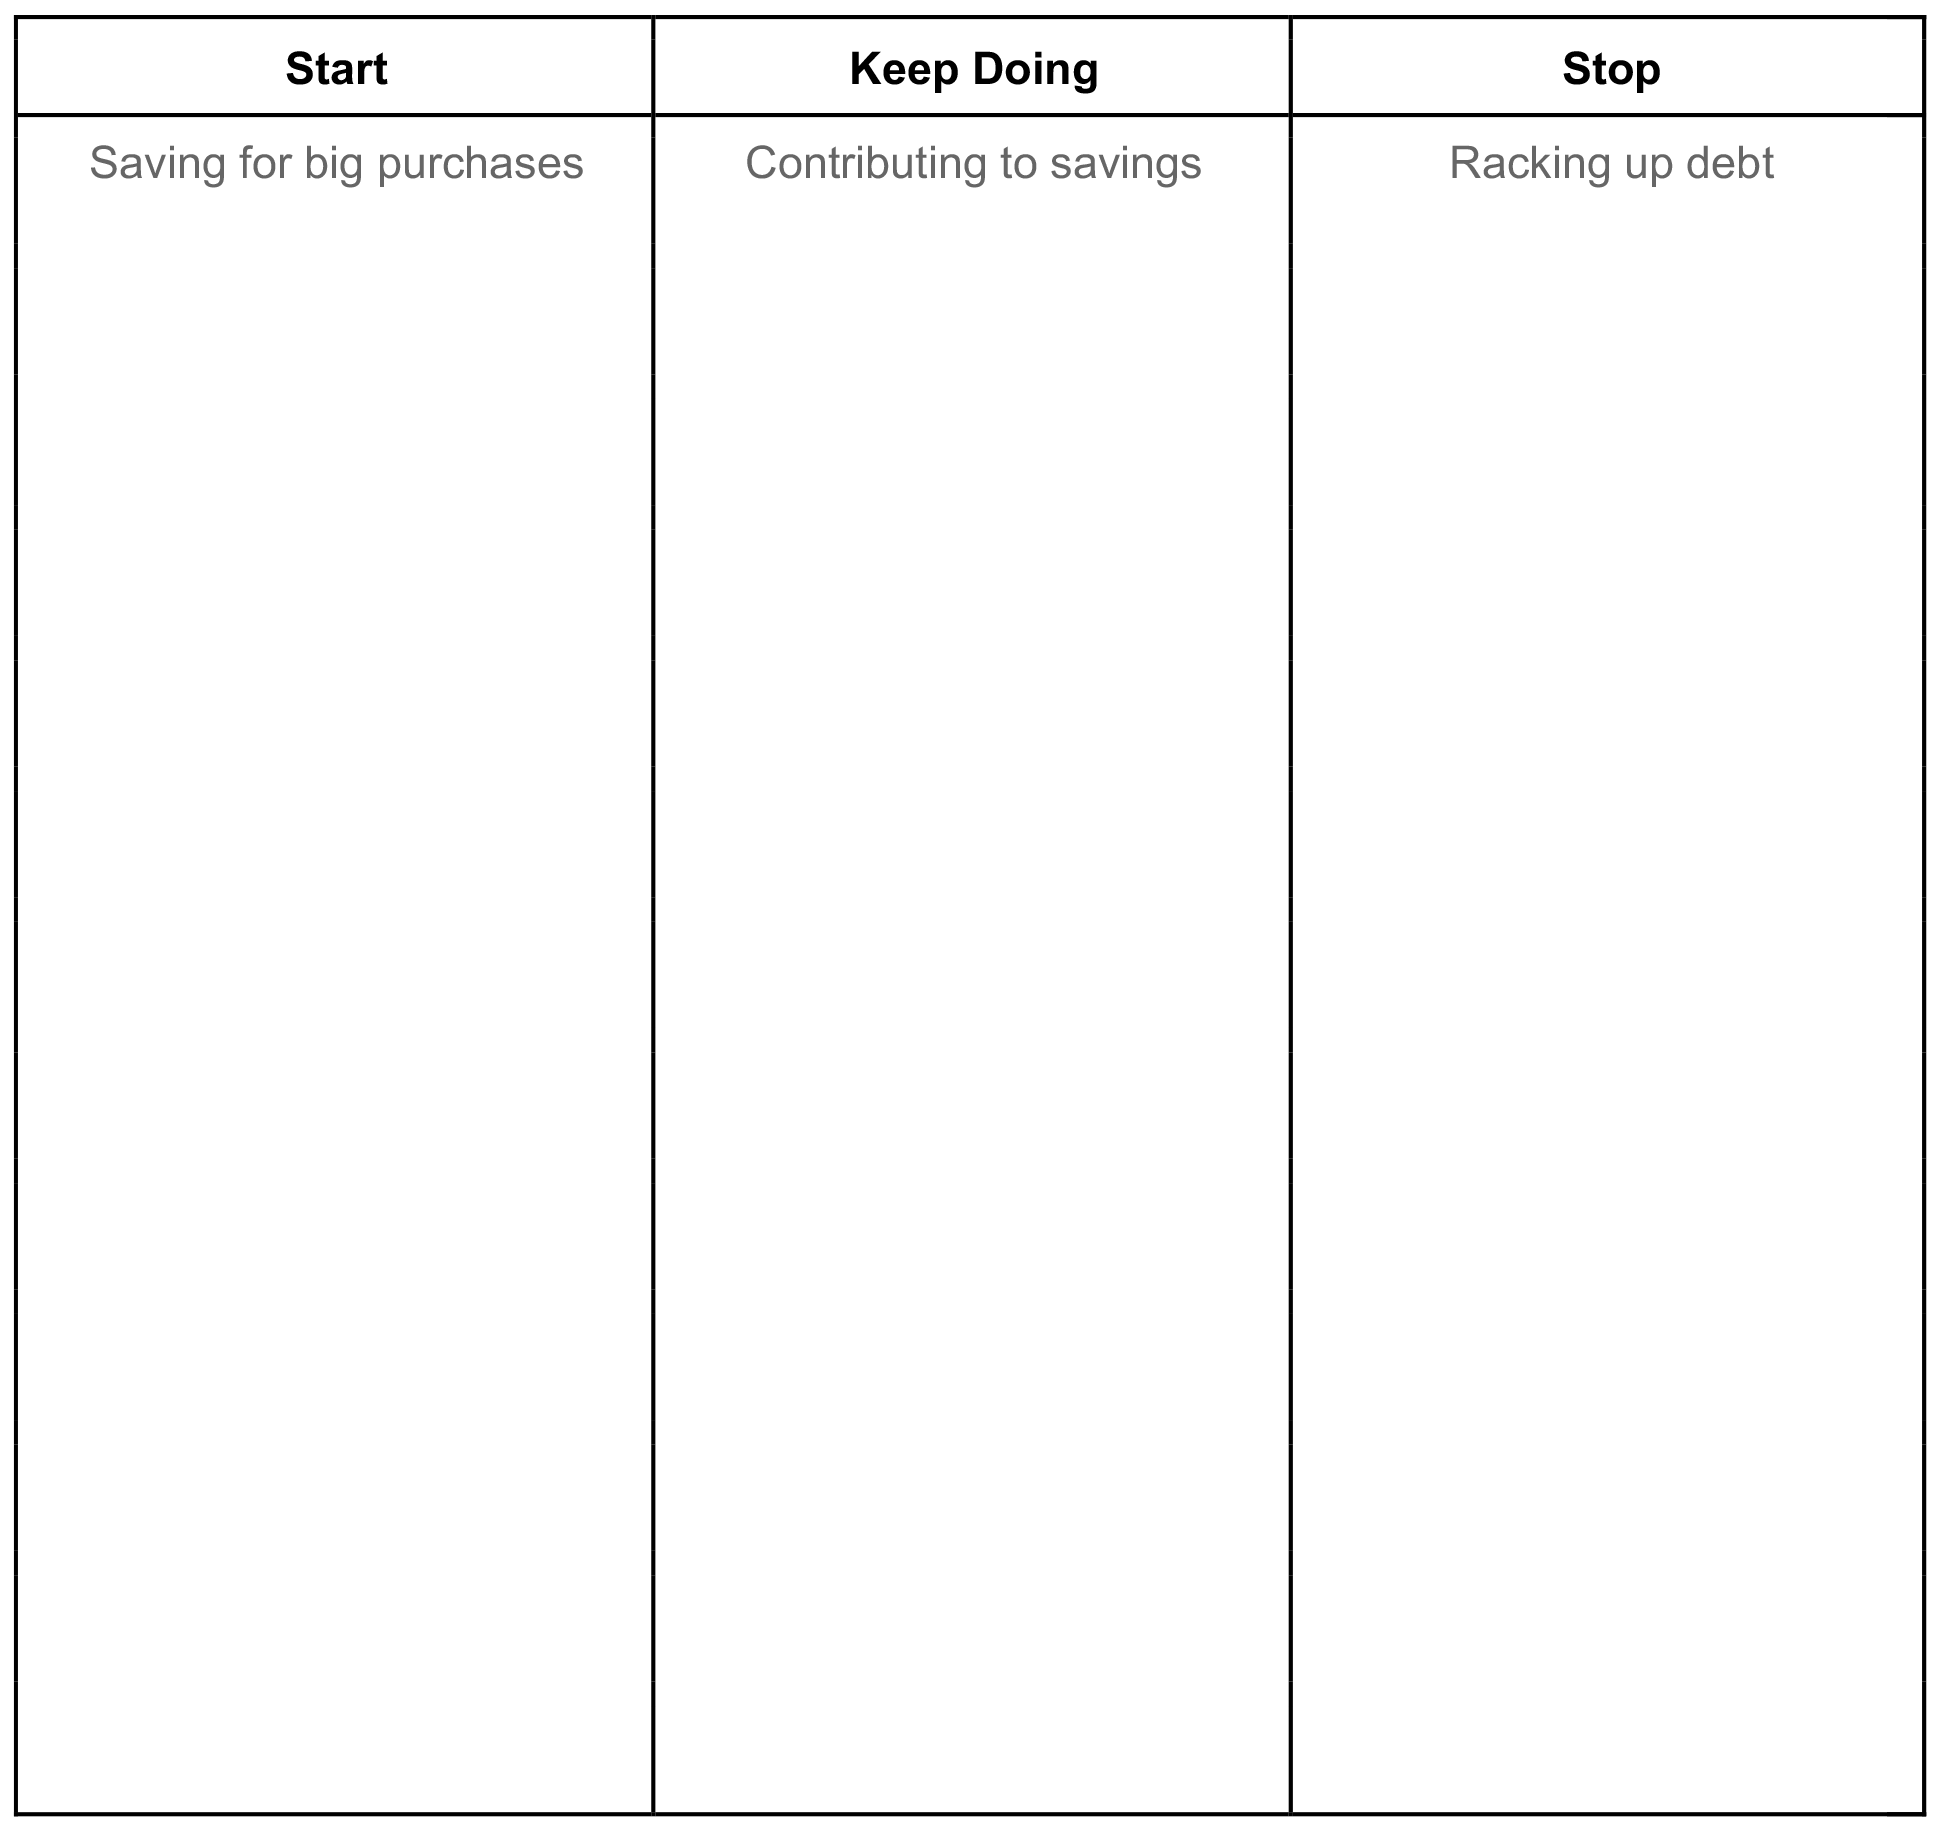 Financial Goal Branstorming Worksheet: A list of behaviors to start, keep doing, and stop